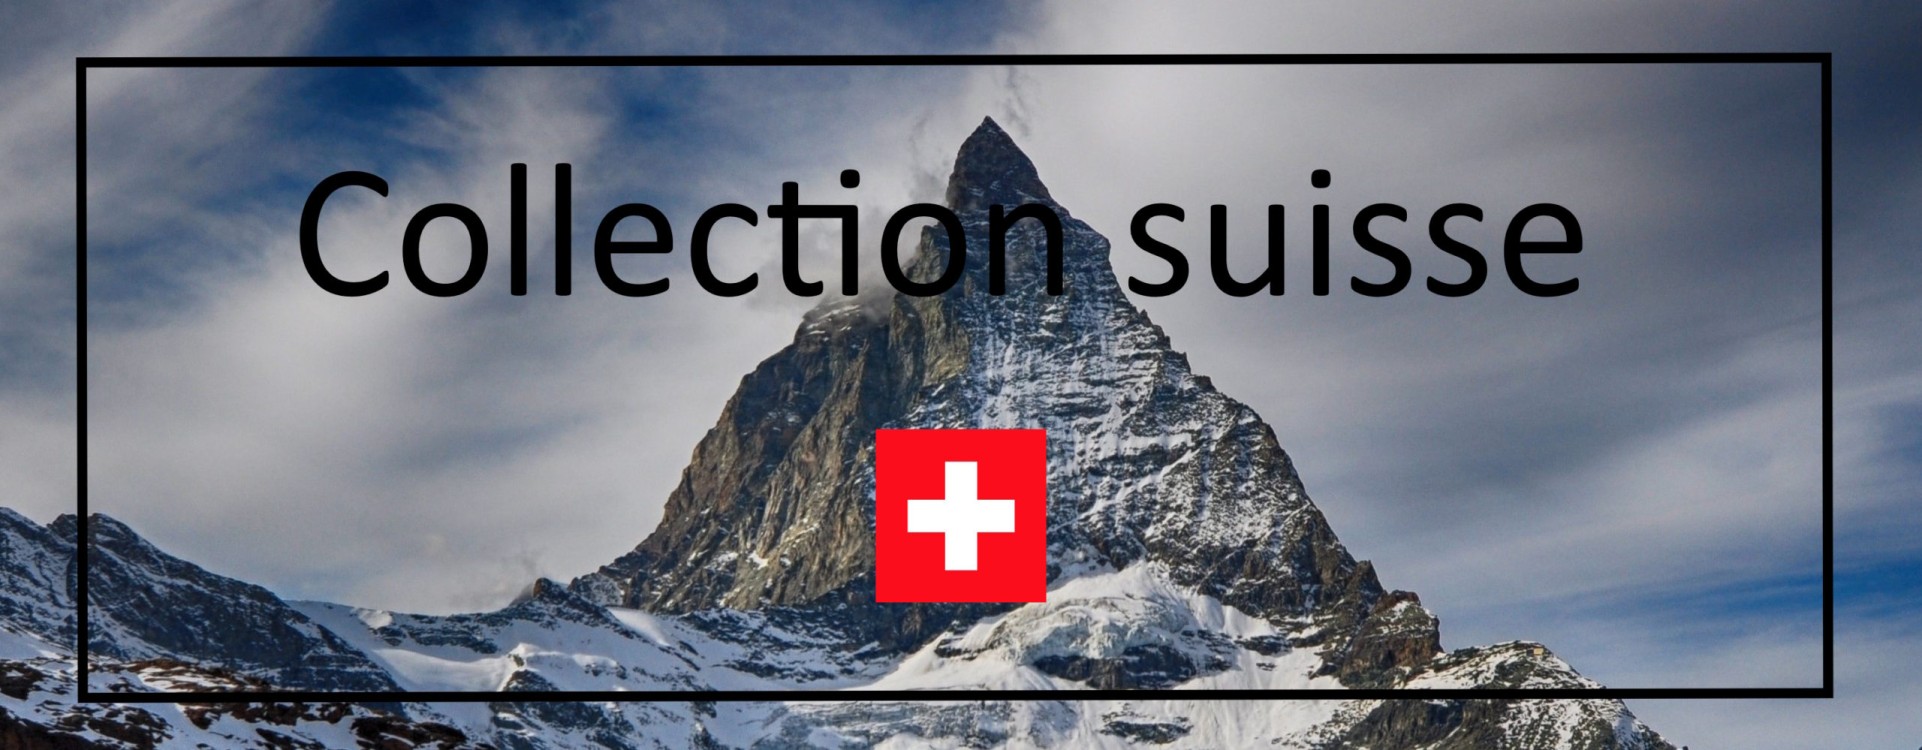 Collection suisse